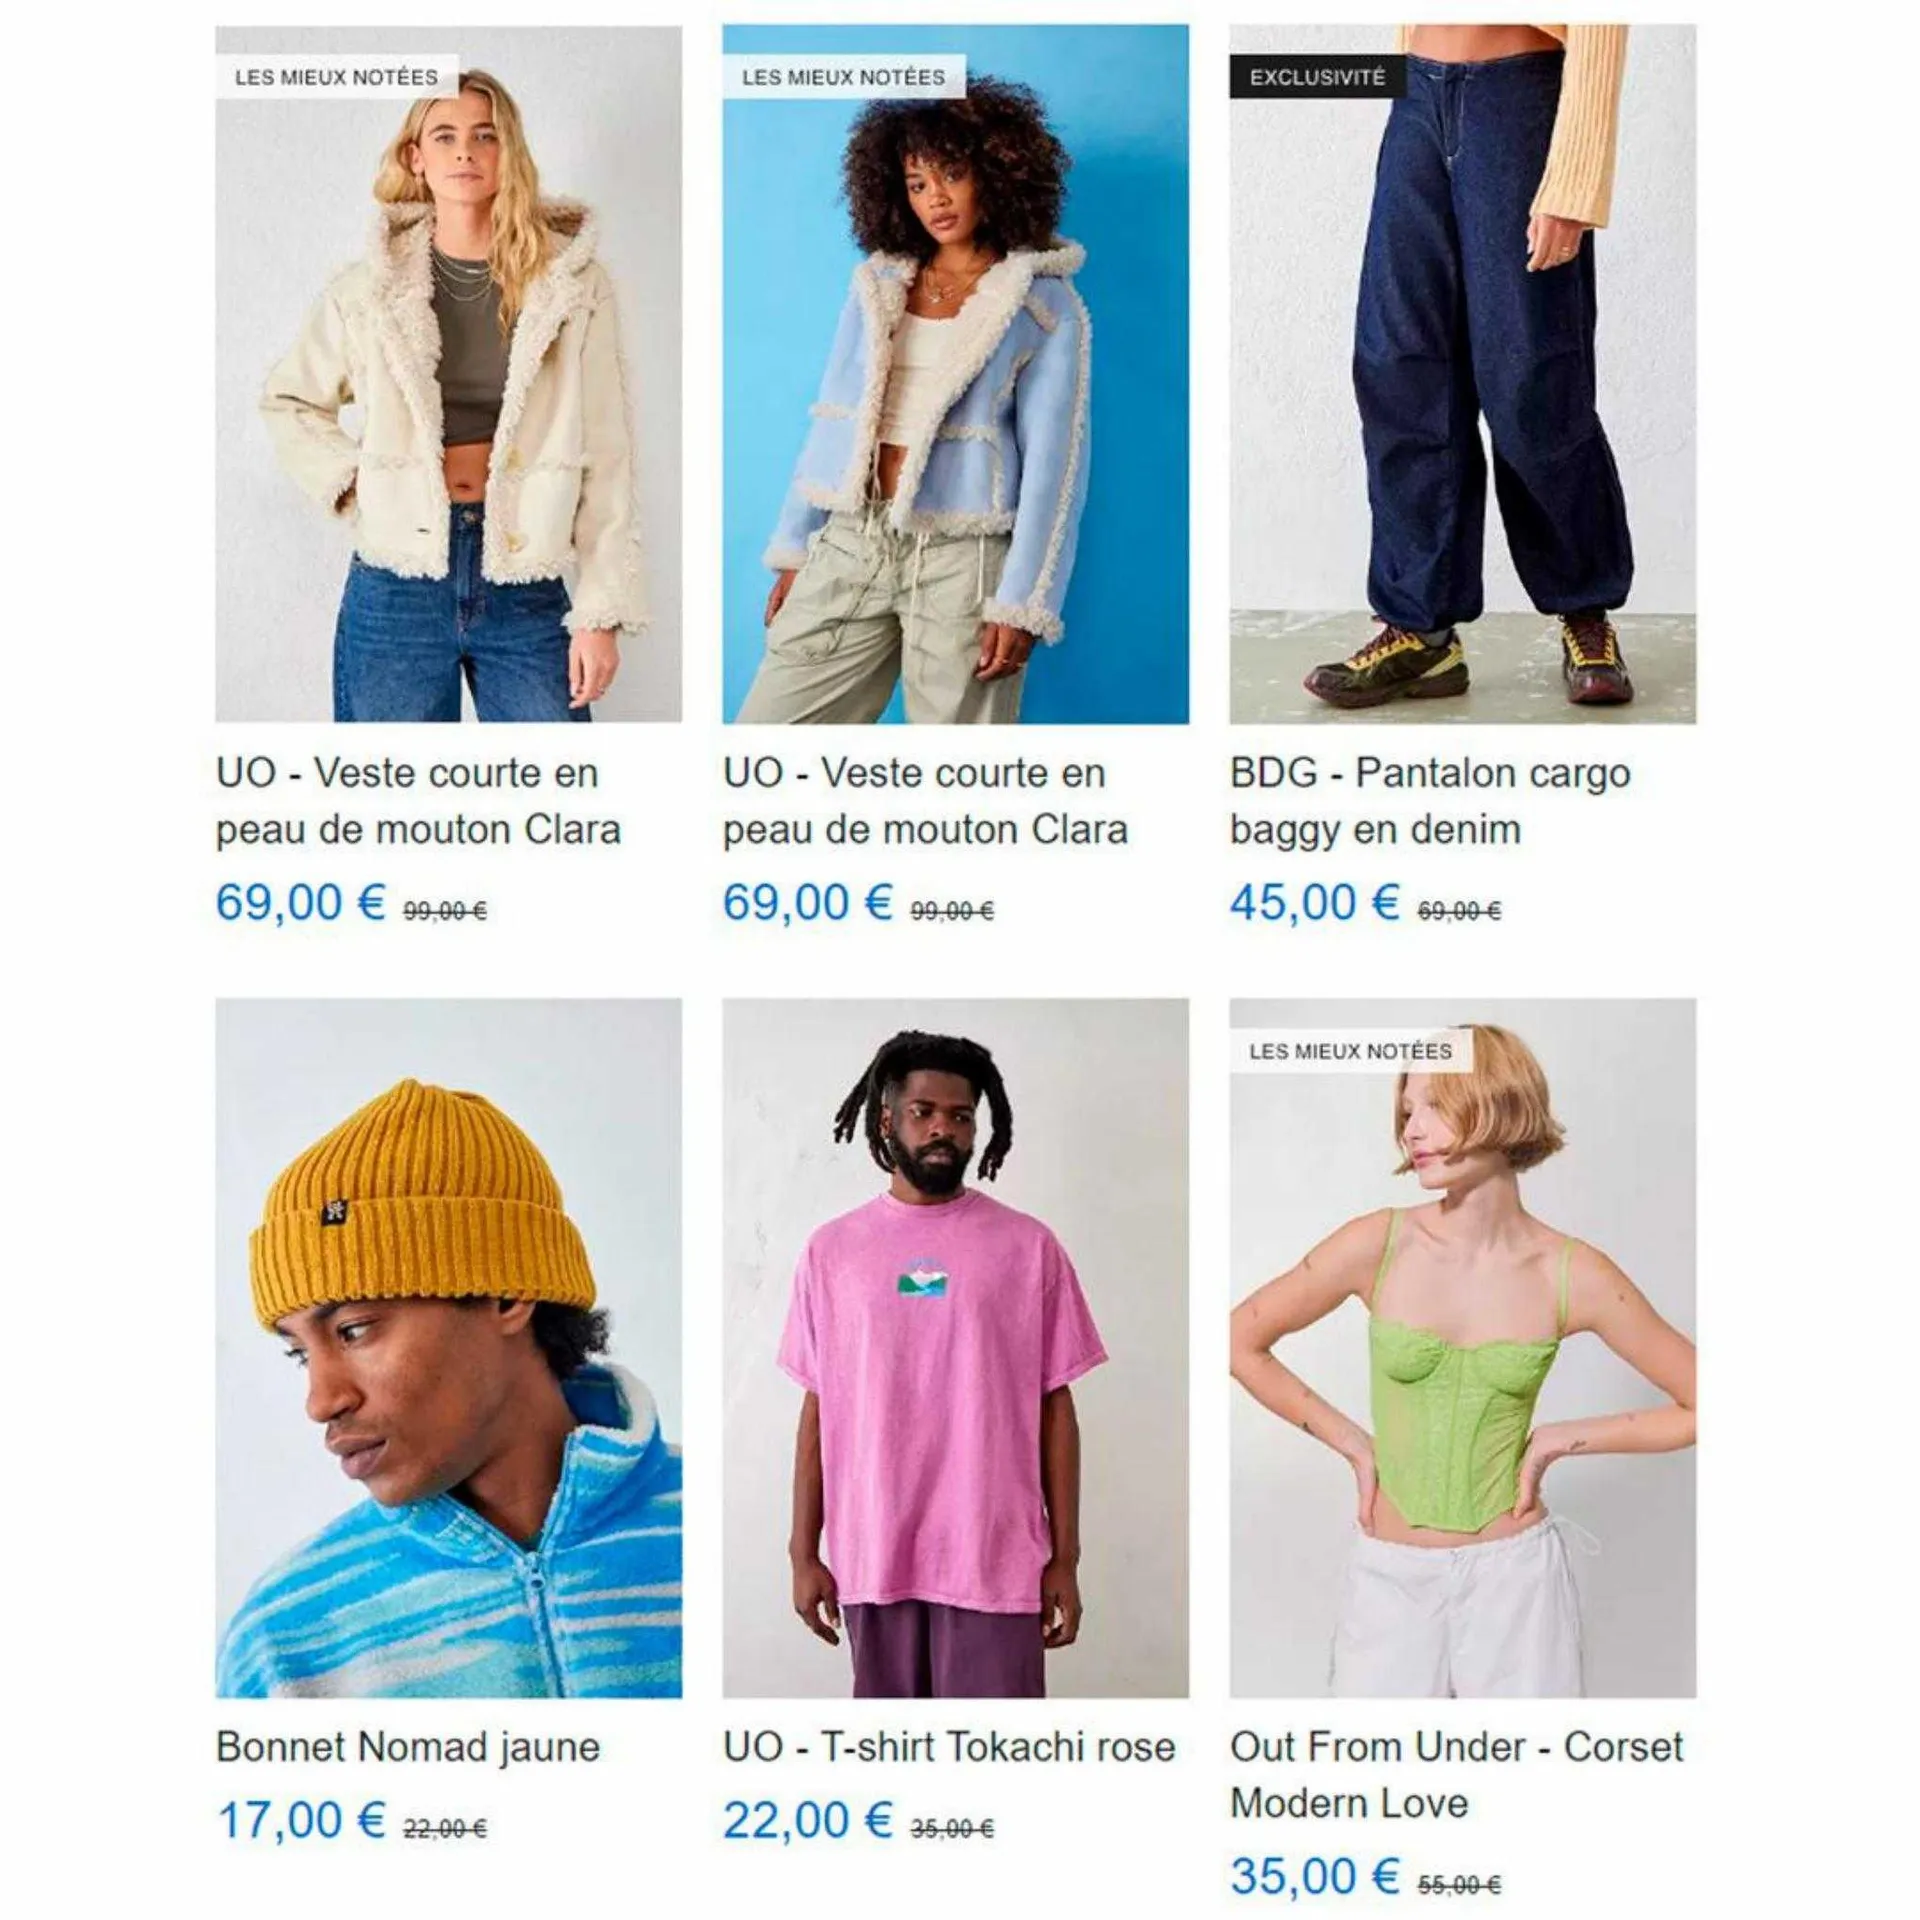 Catalogue Urban Outfitters - 4